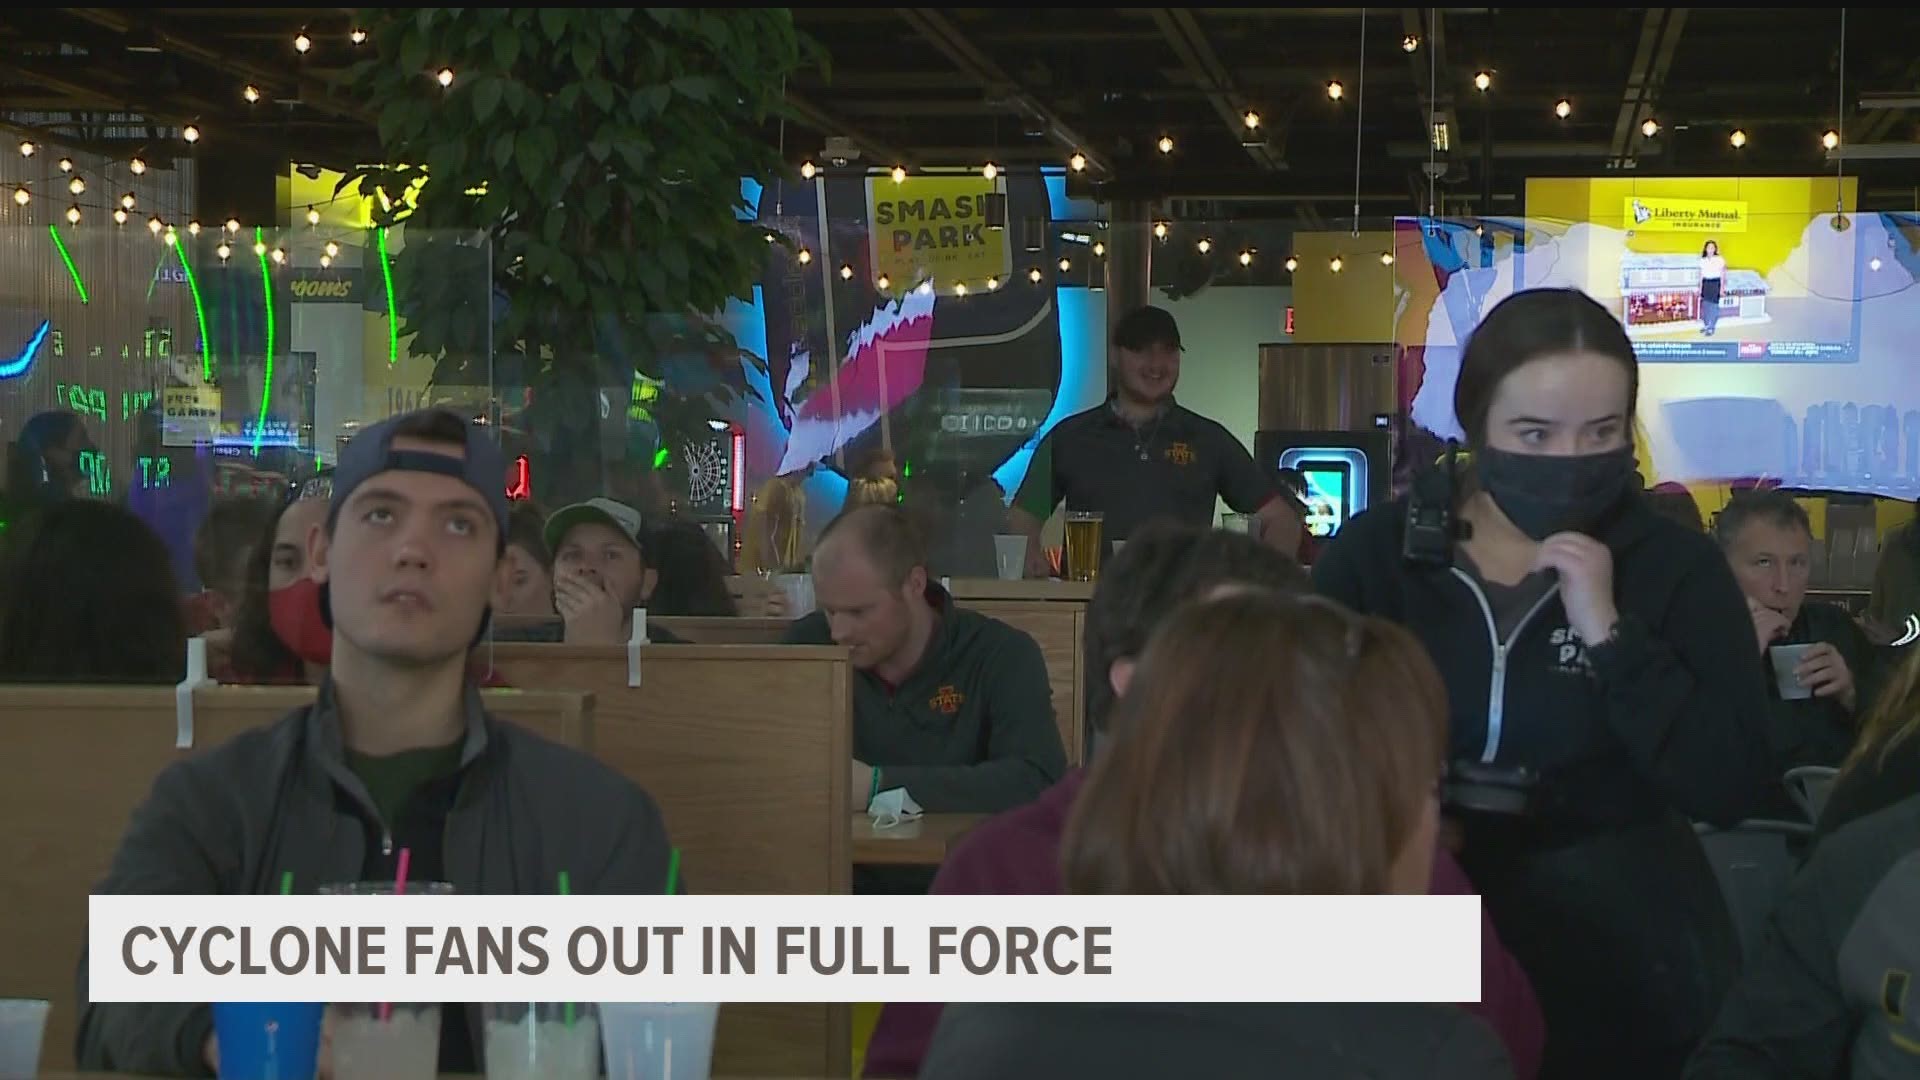 Although there were no fans allowed at the Fiesta Bowl, Cyclone fans still showed out in their home state.